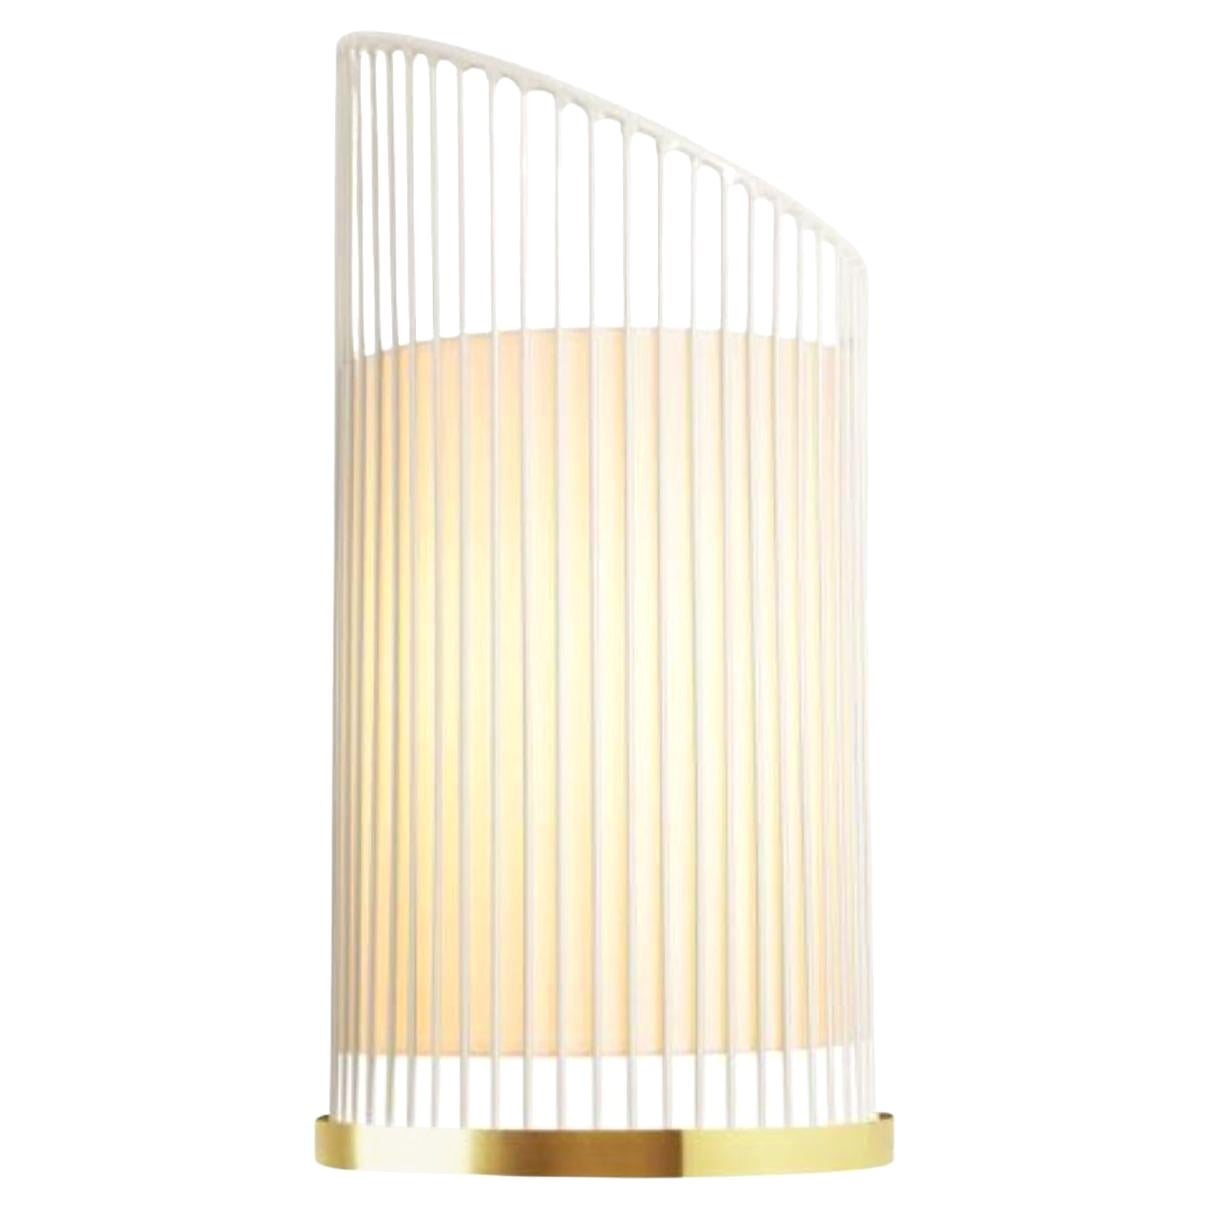 Ivory New Spider Wall Lamp with Brass Ring by Dooq